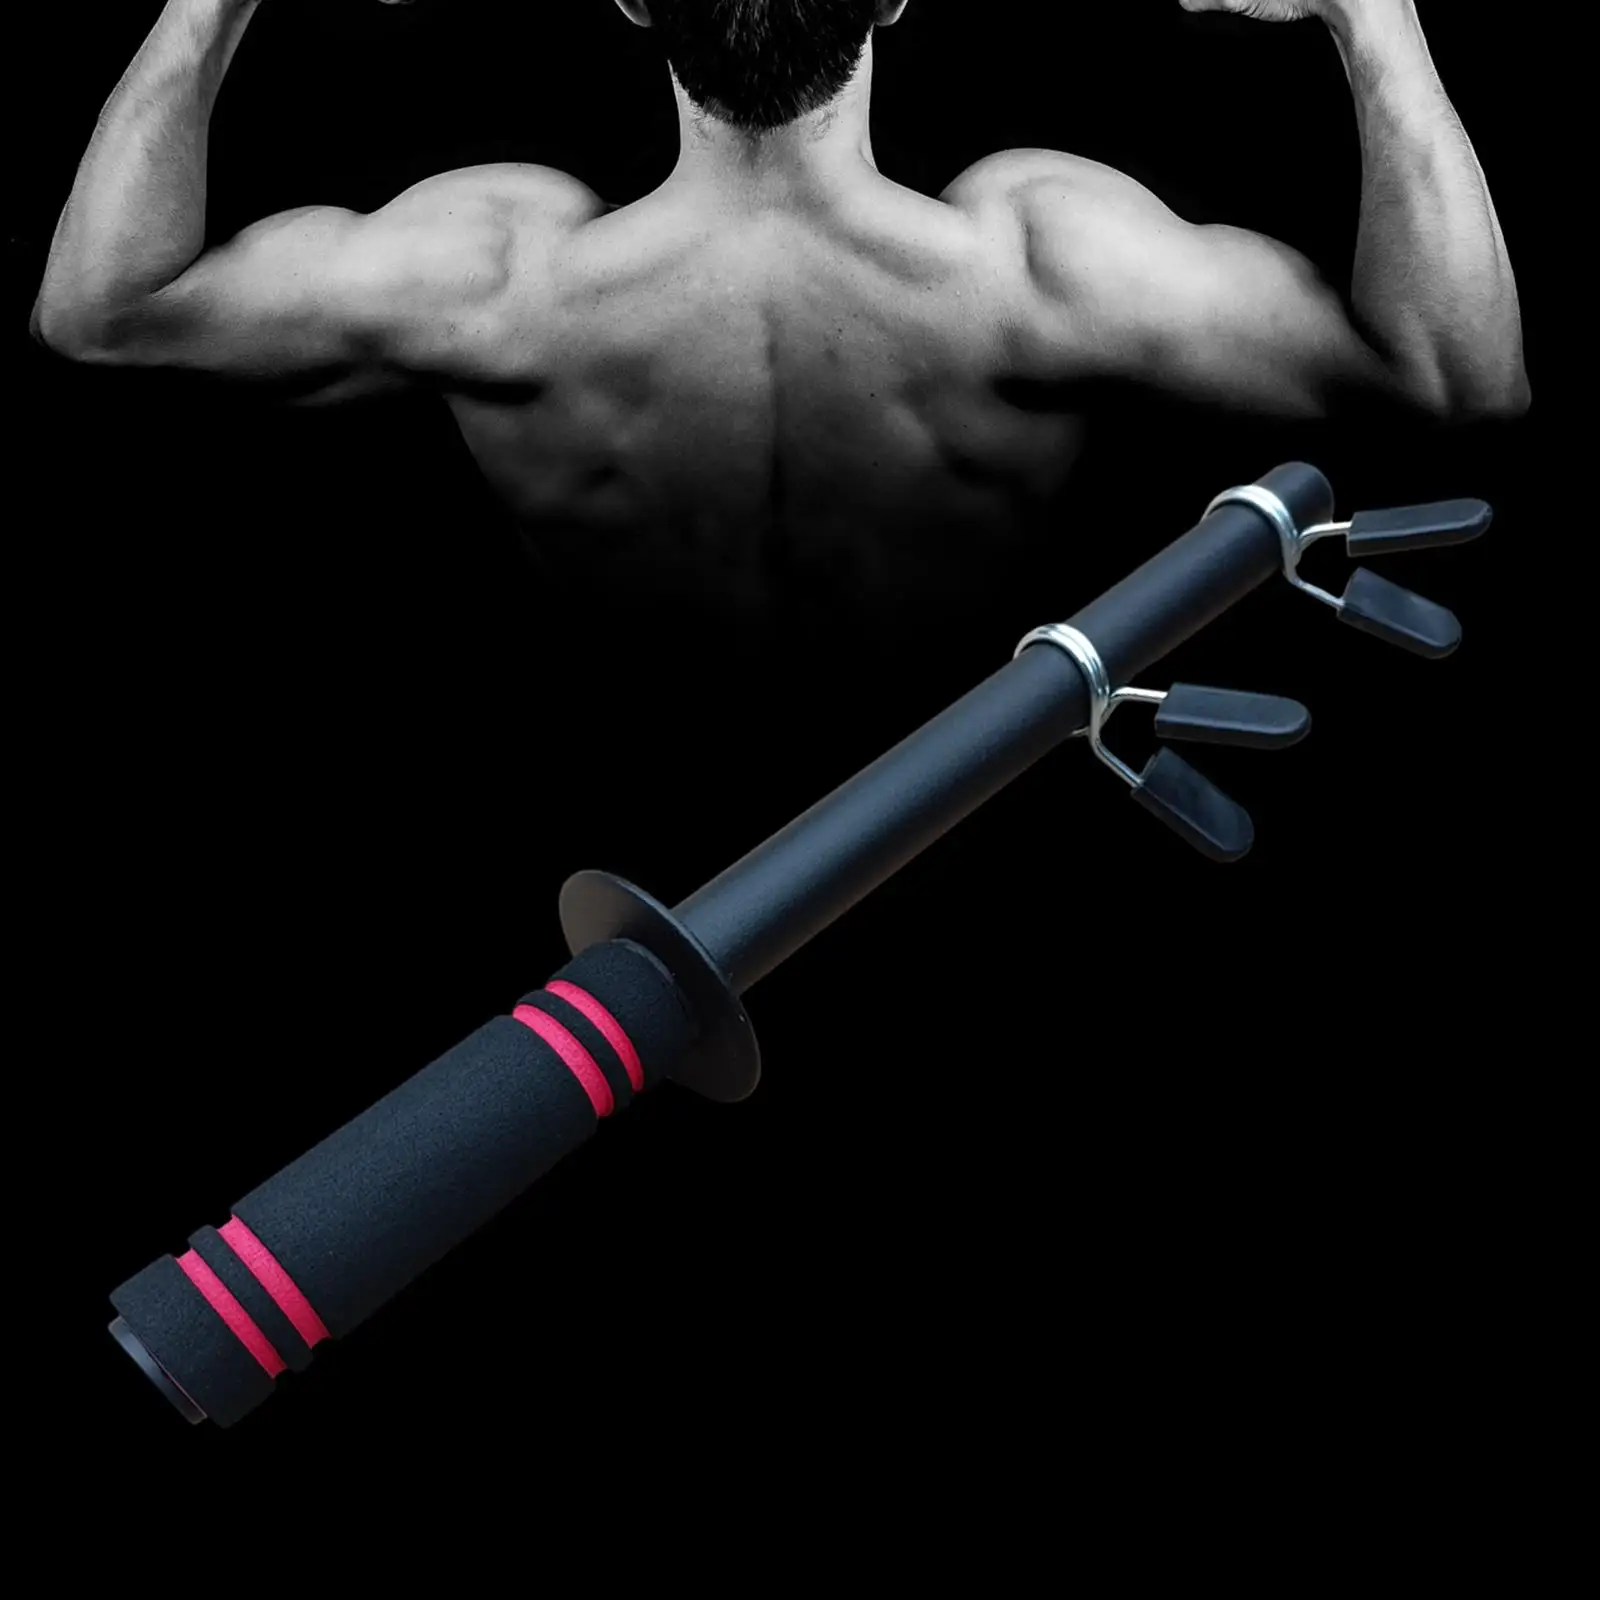 Dumbbell Bar Handle Heavy Duty Handle Strength Training Forearm Wrist Exerciser Forearm Trainer for Home Fitness Workout